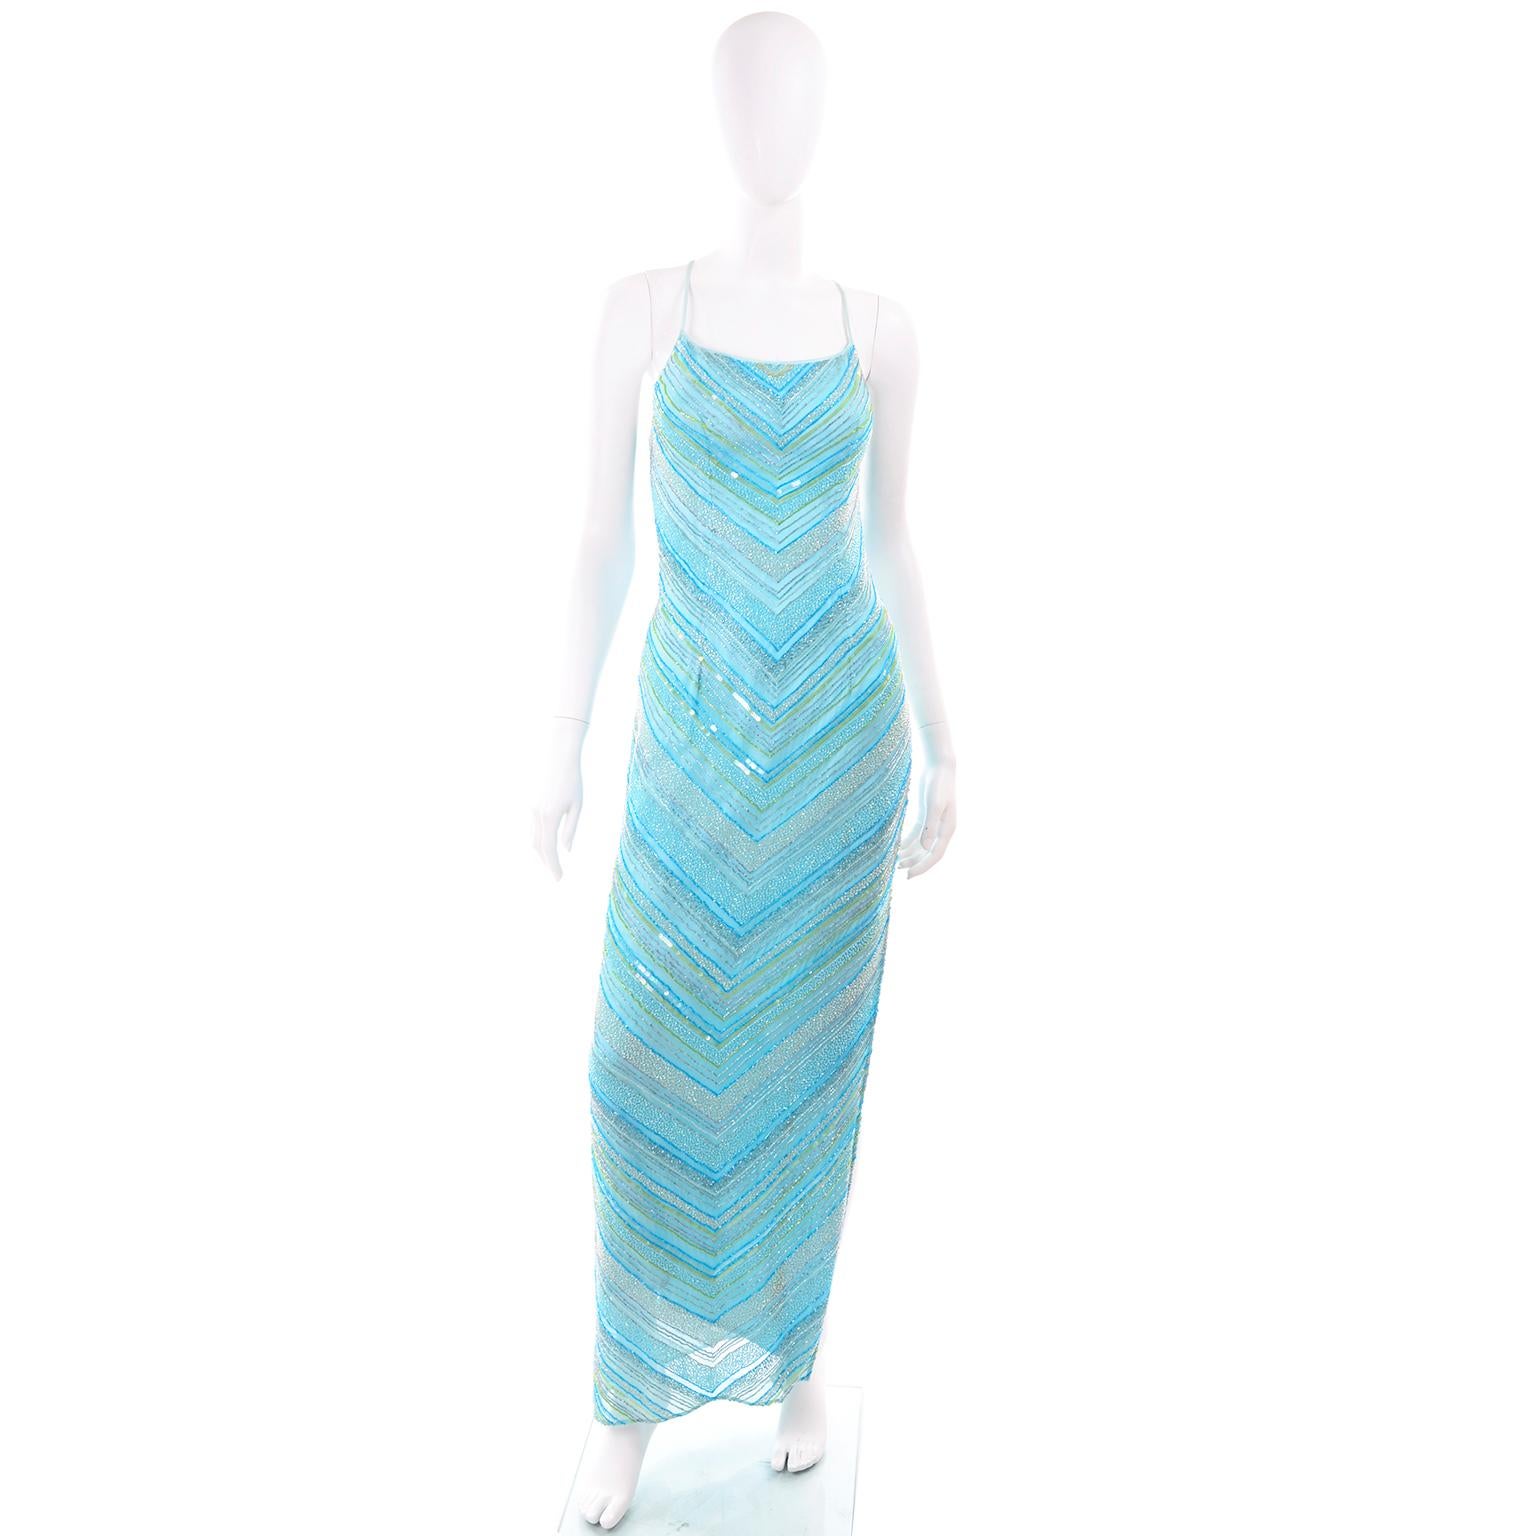 This is a stunning vintage 1990's beaded gown with thin criss cross straps over a scooped, open back. There are a variety of shades of blue beads that form a chevron pattern. Unfortunately, the label has been removed but it is such a beautiful